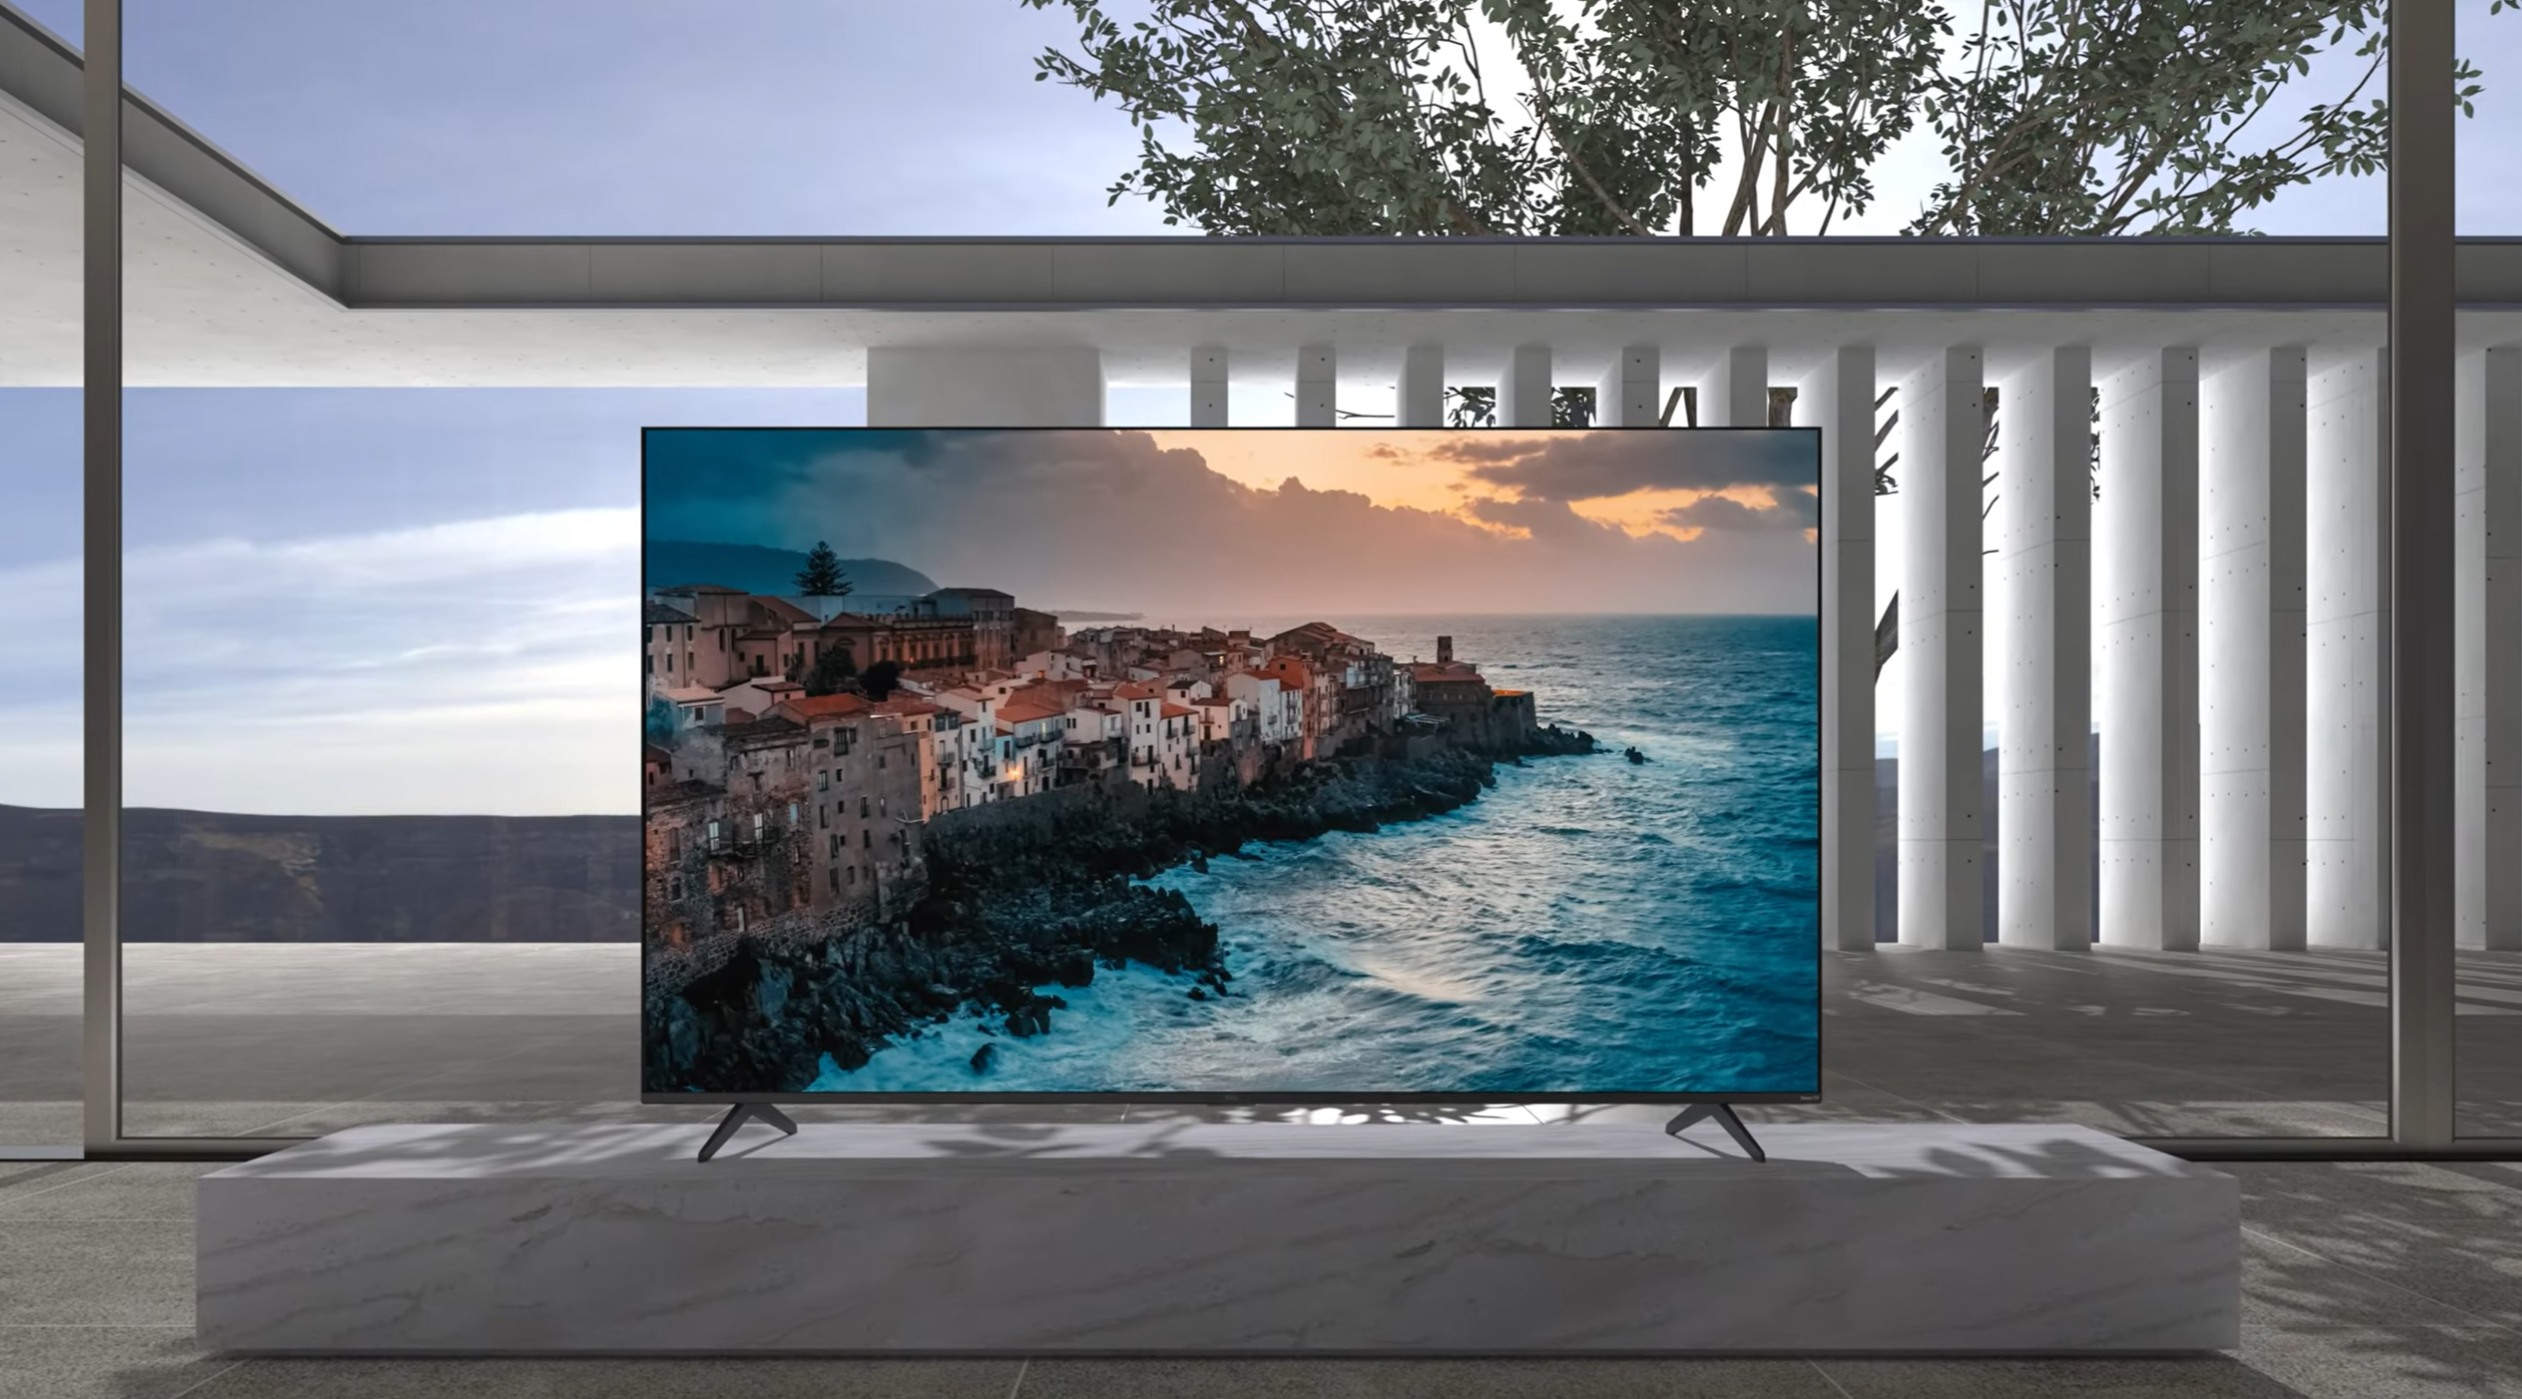 Get 50% savings on a new 98-inch TCL Class S5 4K LED smart TV